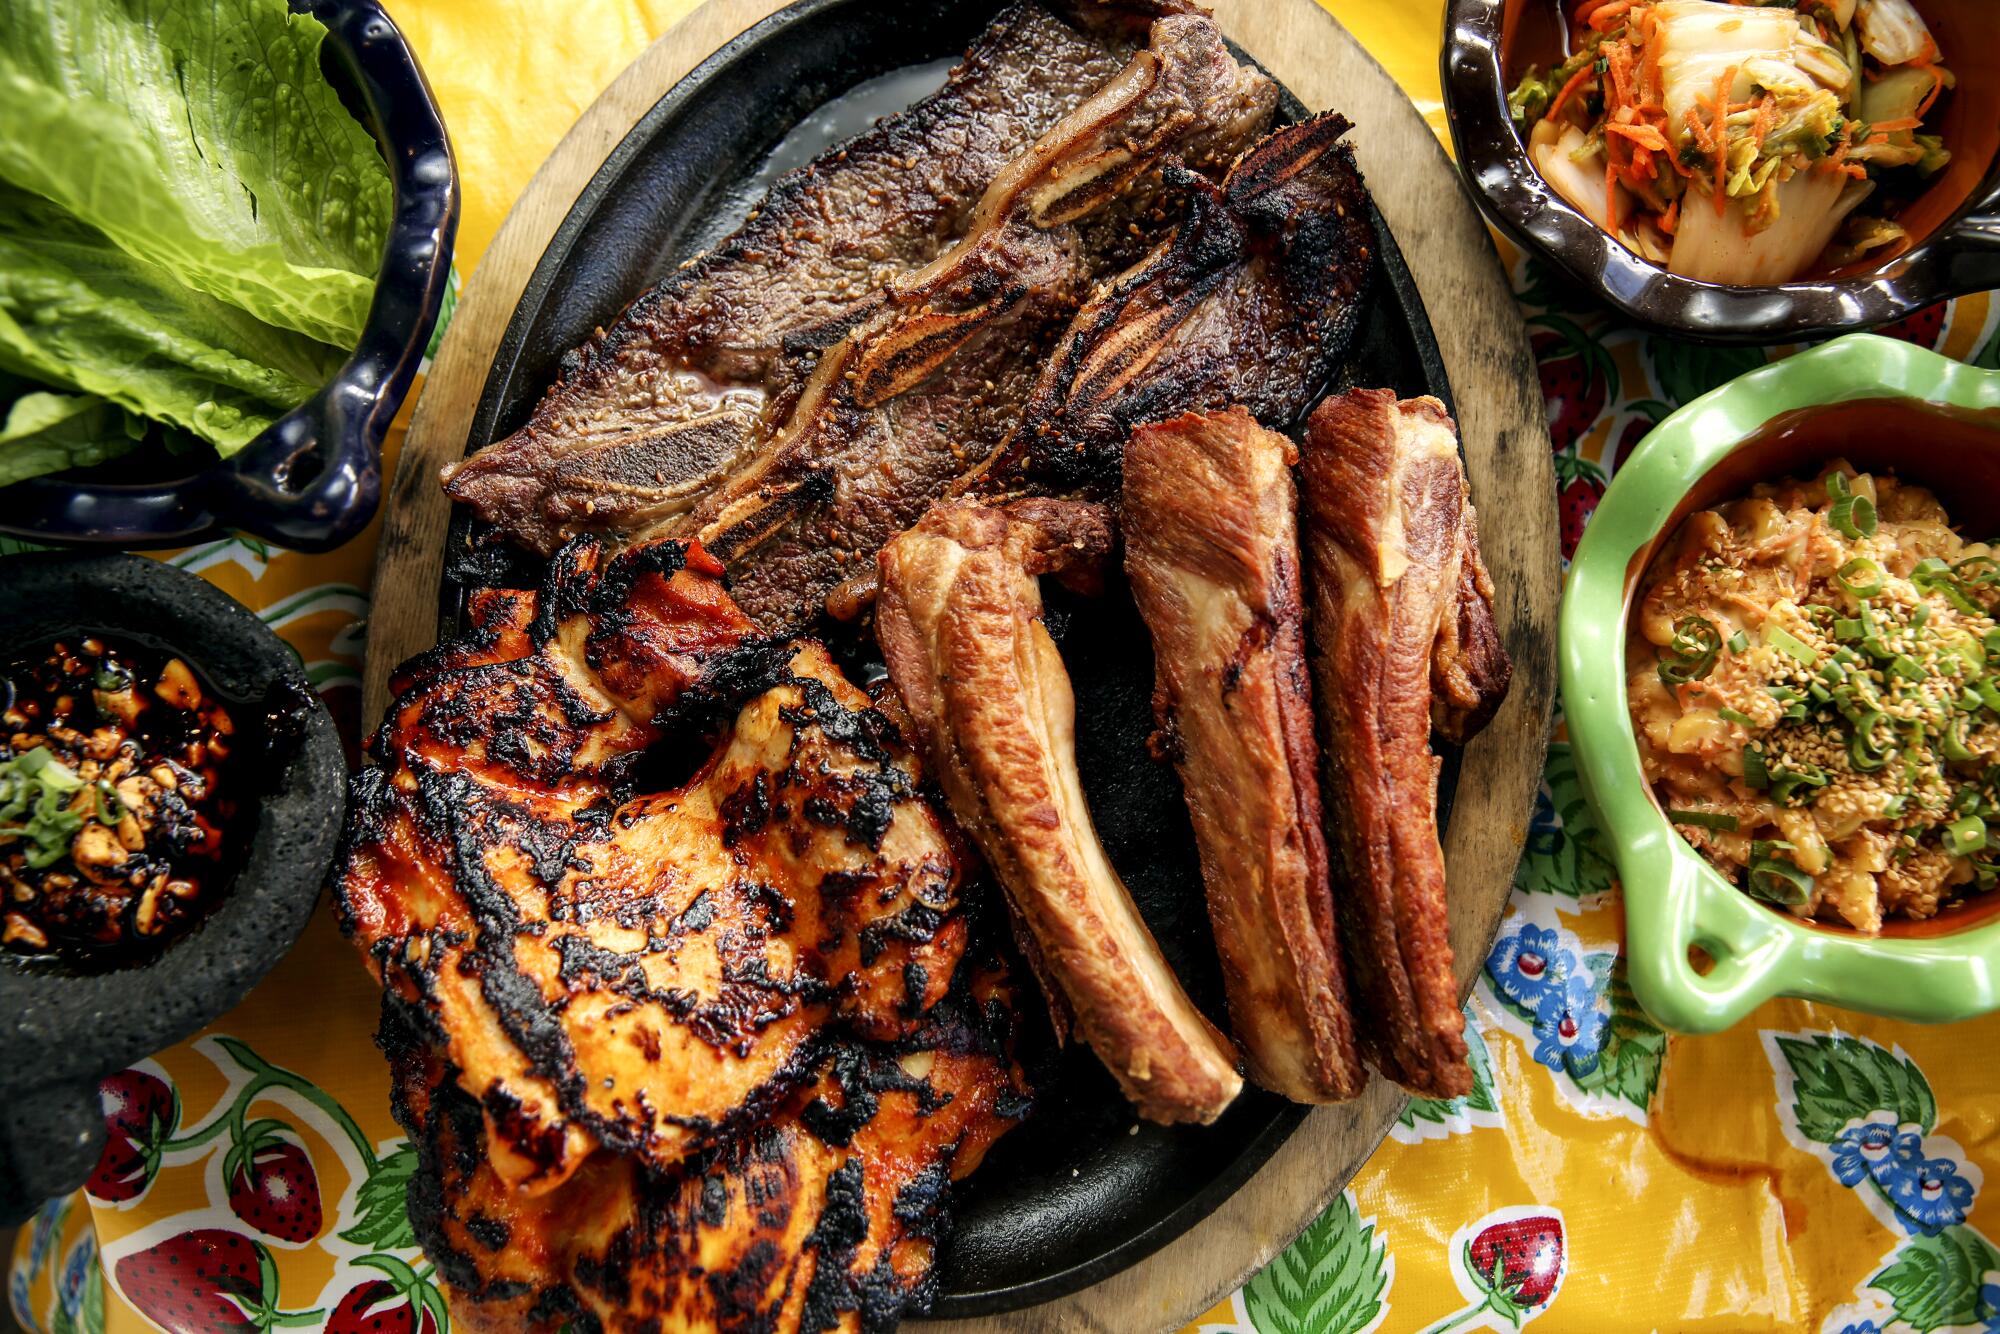 An overhead view of marinated short ribs, spicy chicken thighs, charcoal pork ribs and an assortment of garnishes on a table